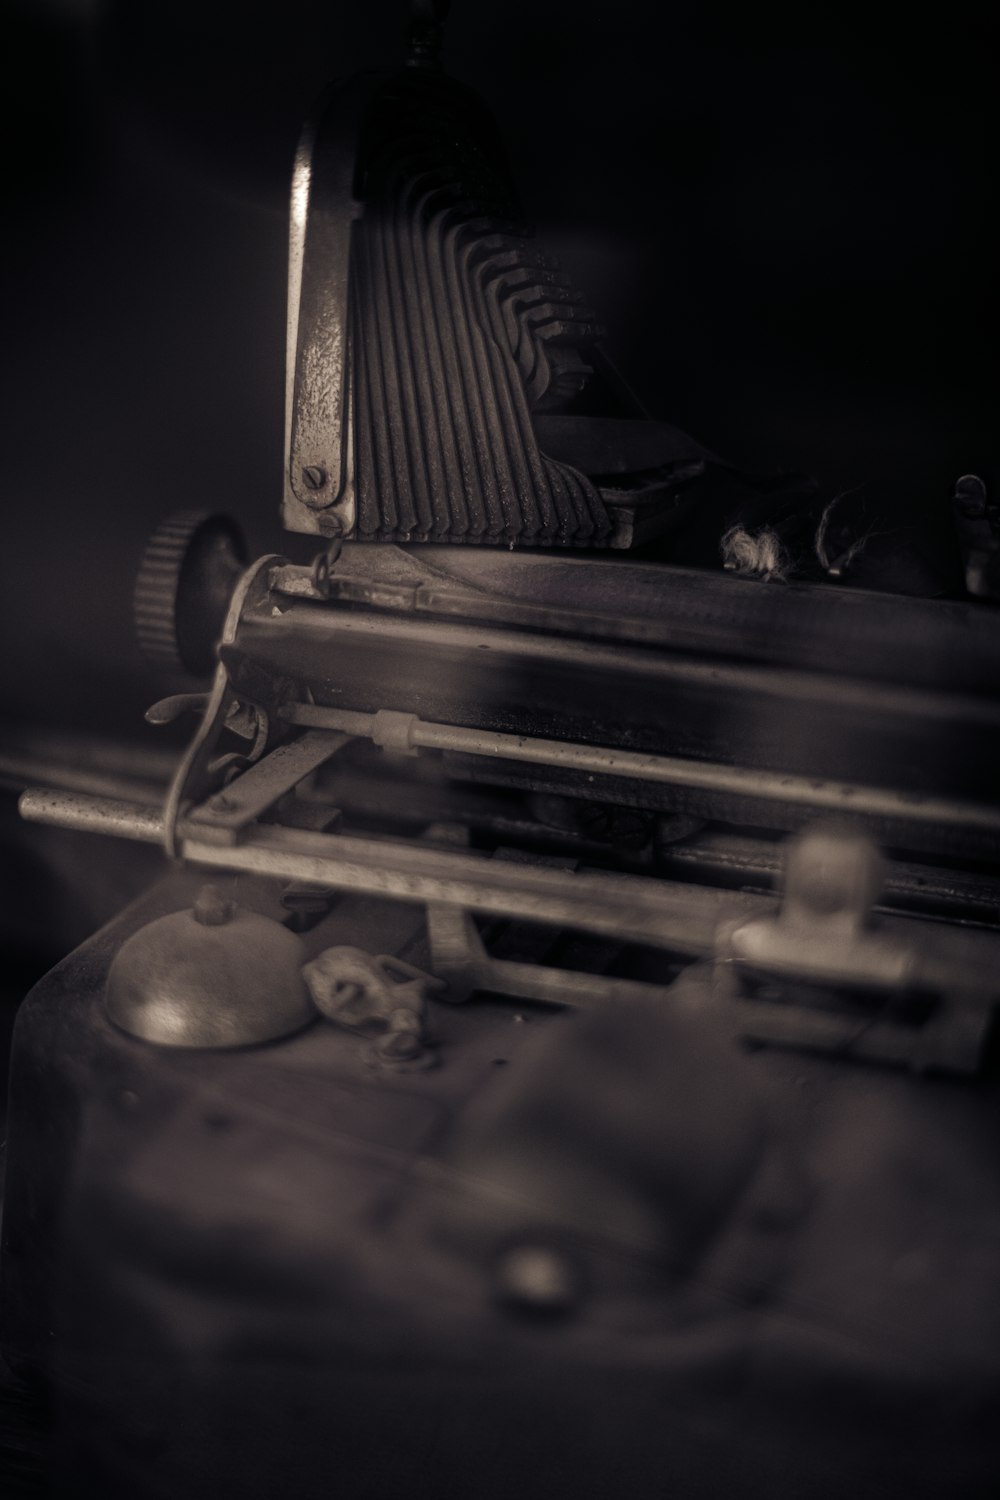 a close up of an old typewriter in a dark room